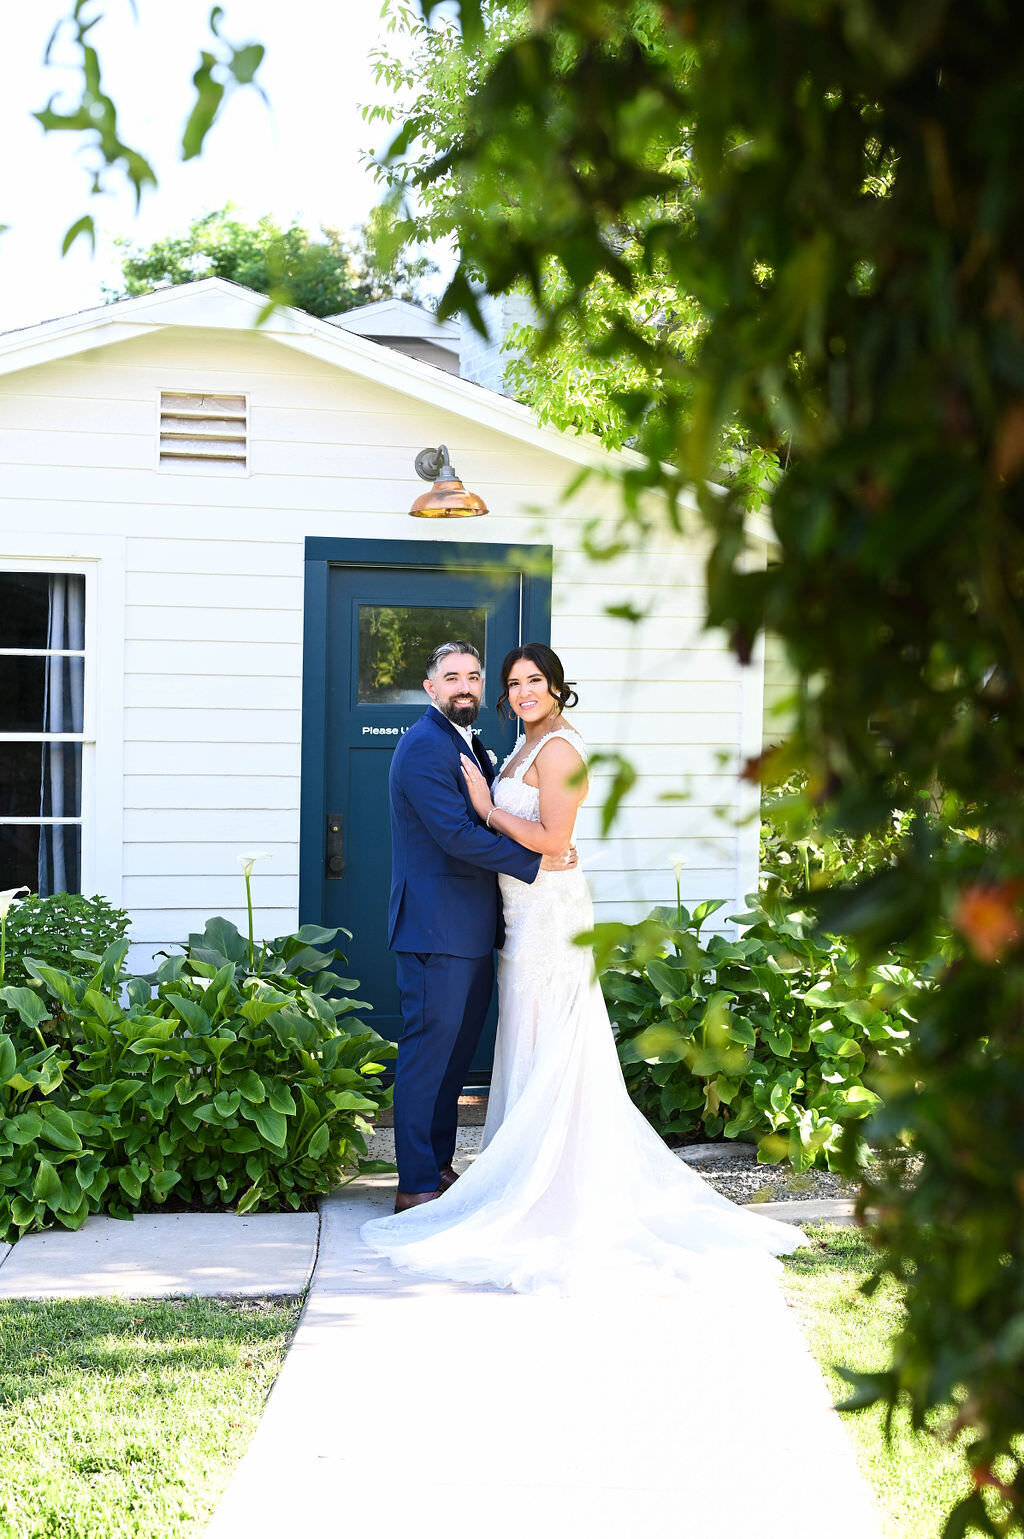 A bride and groom standing close together in front of a quaint house